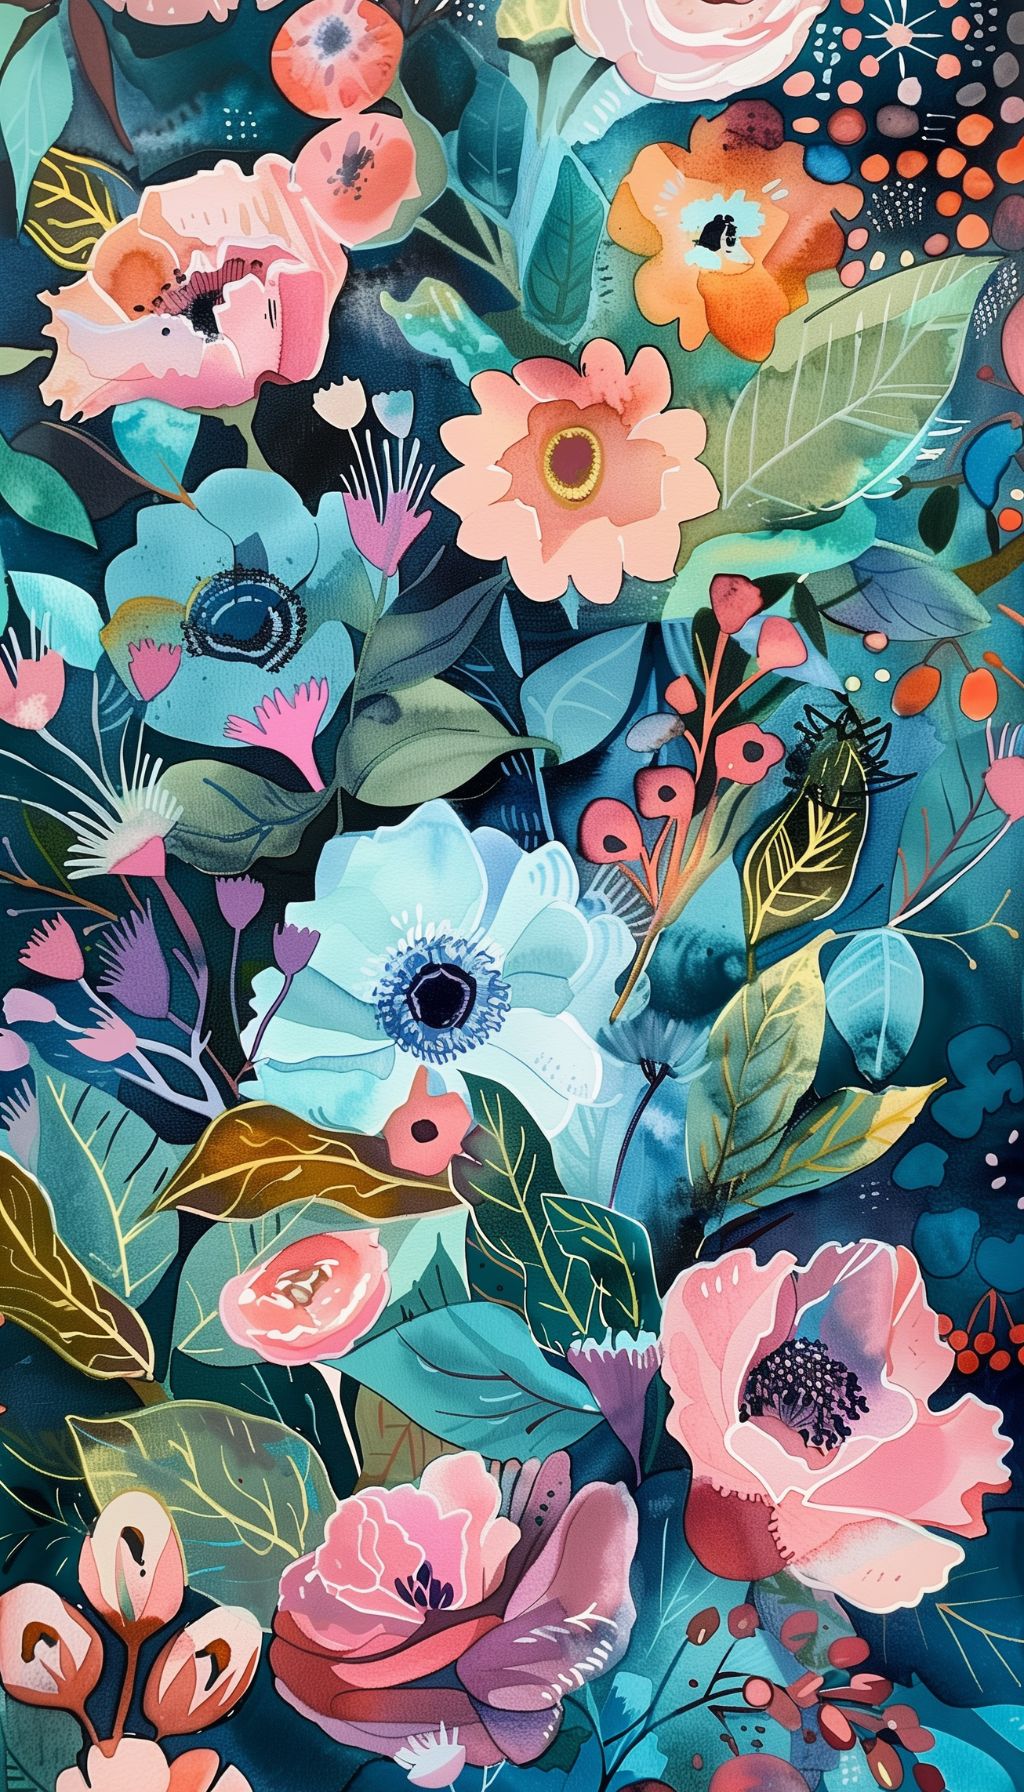 Vibrant floral design with colorful flowers and leaves for iPhone wallpaper